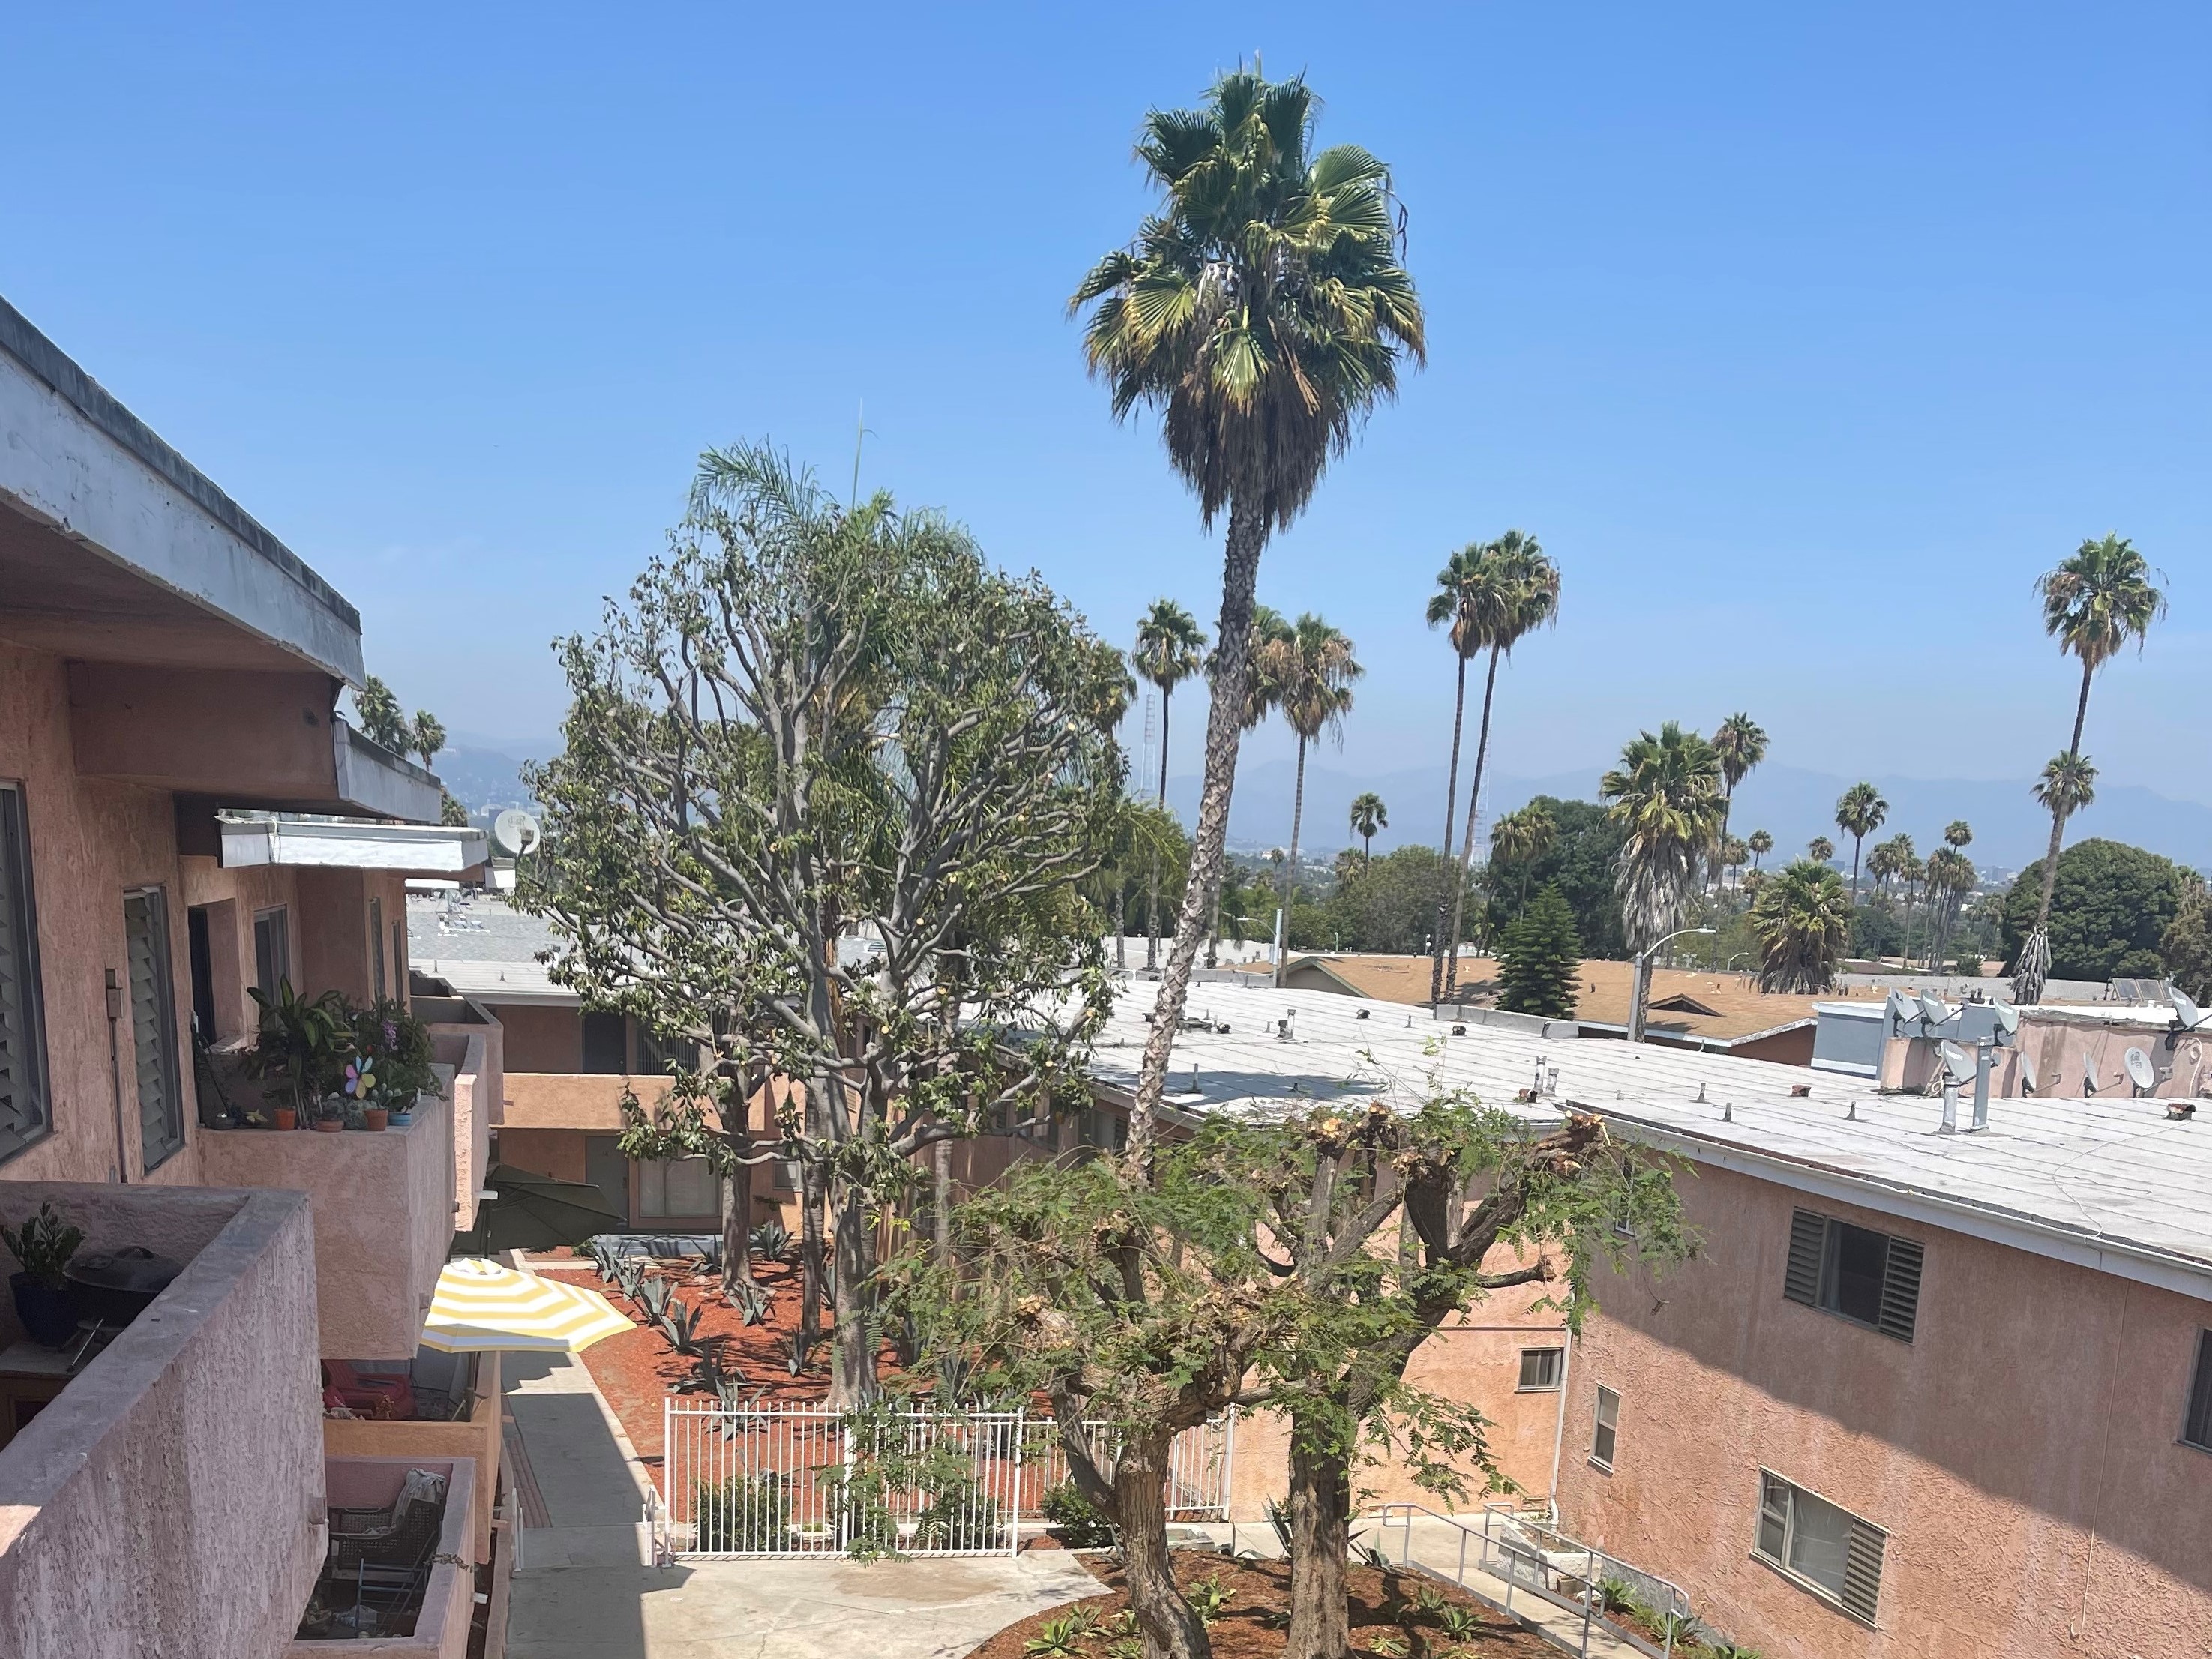 Balcony view showing the courtyard with palm tree, Jacaranda trees and Agave